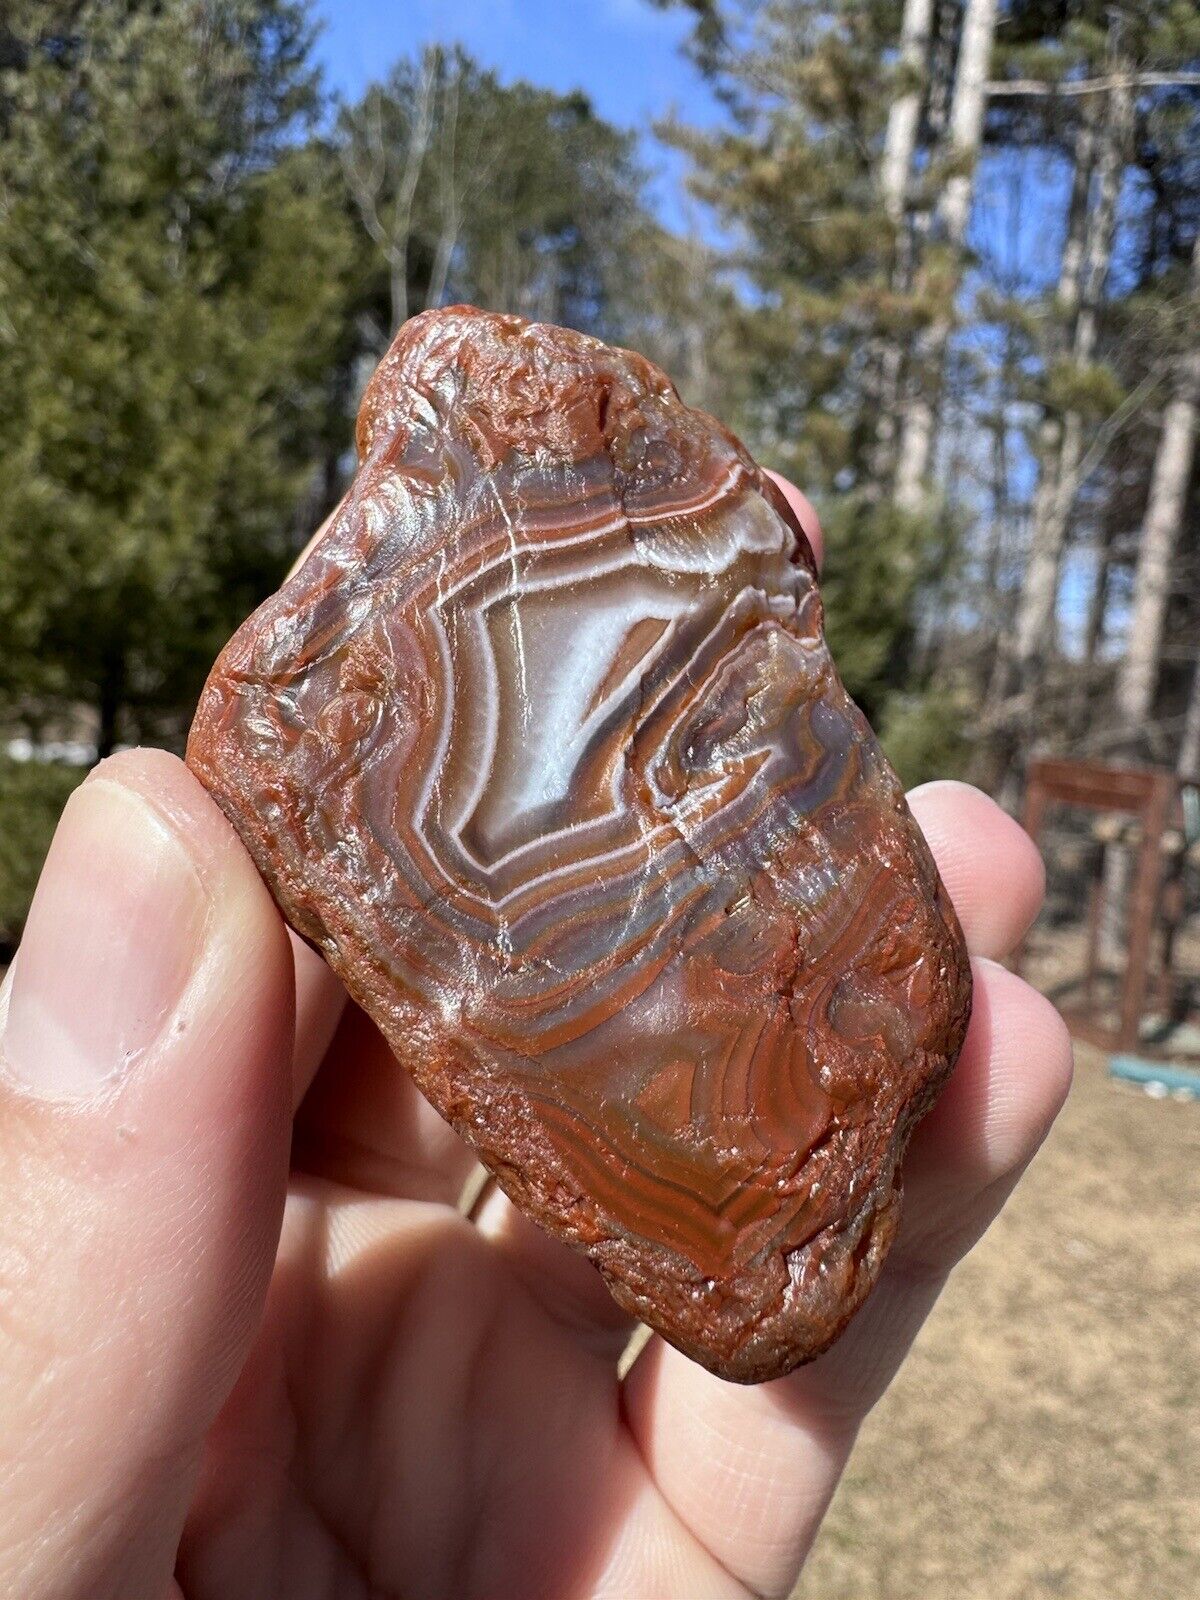 4.34oz Lake Superior Agate, High Contrast Banding & Great Depth